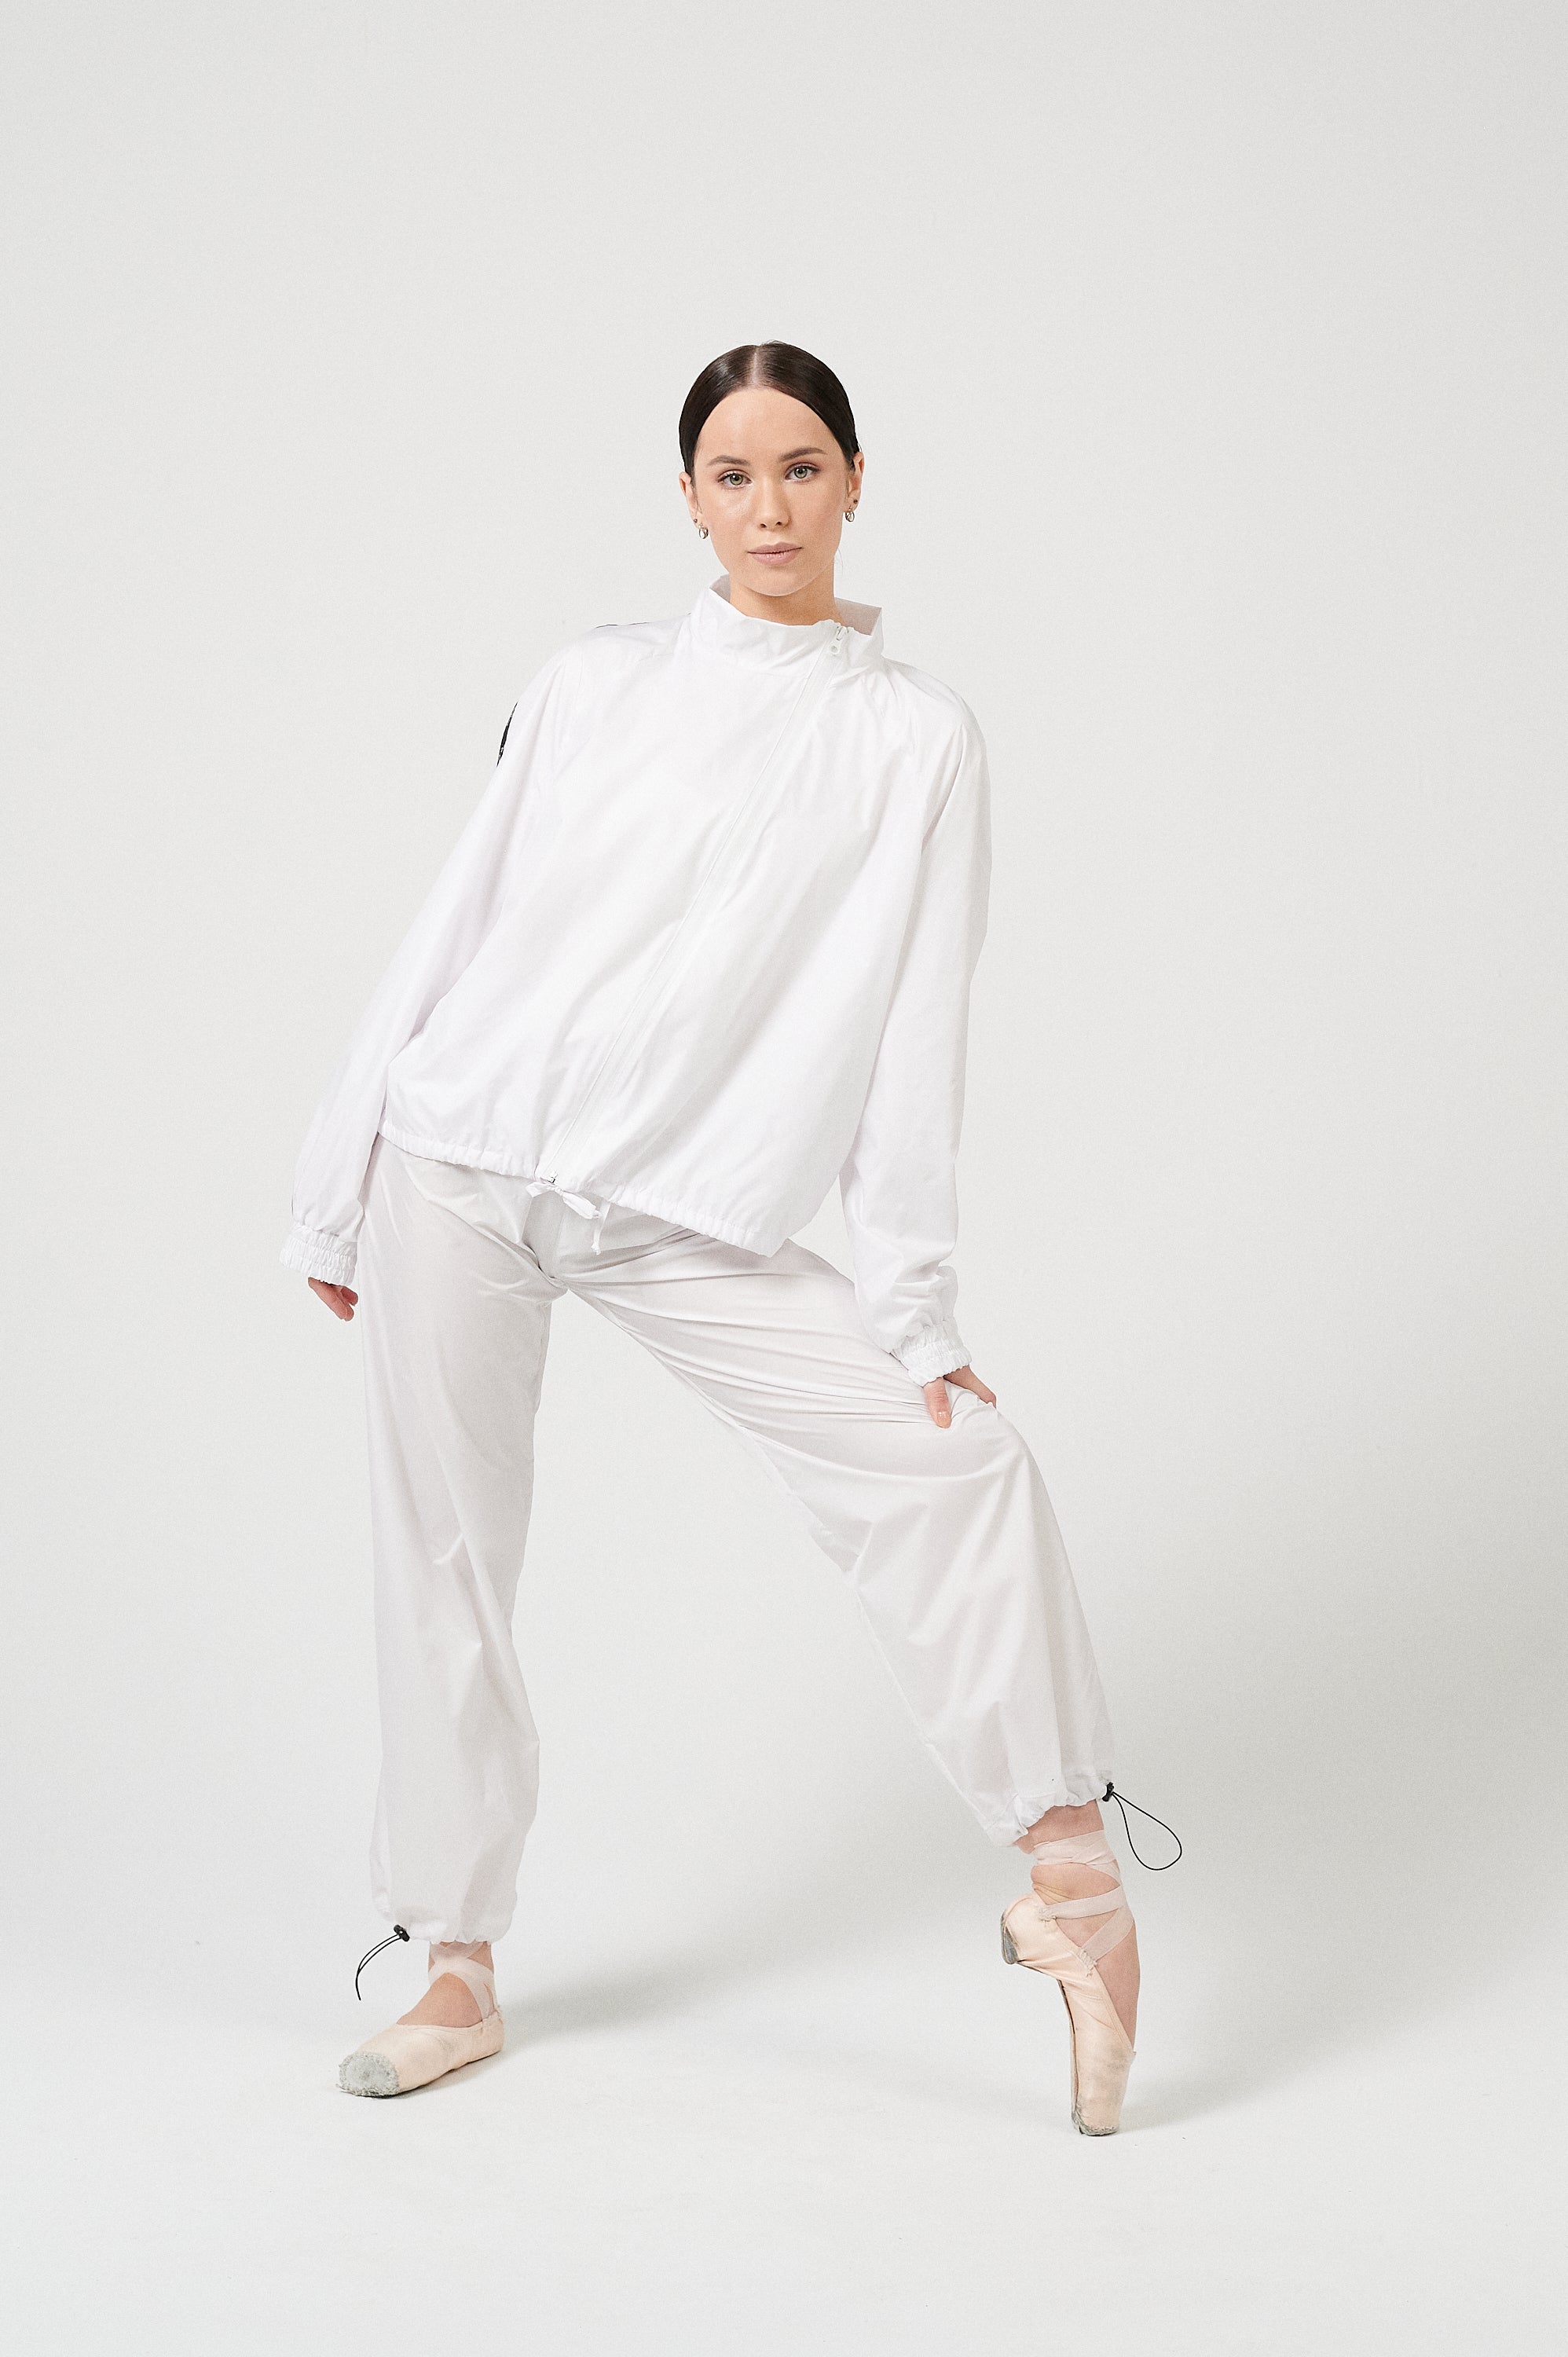 FUTURE GISELLE COLLECTION 24 | Cosmic white sports suit with pants